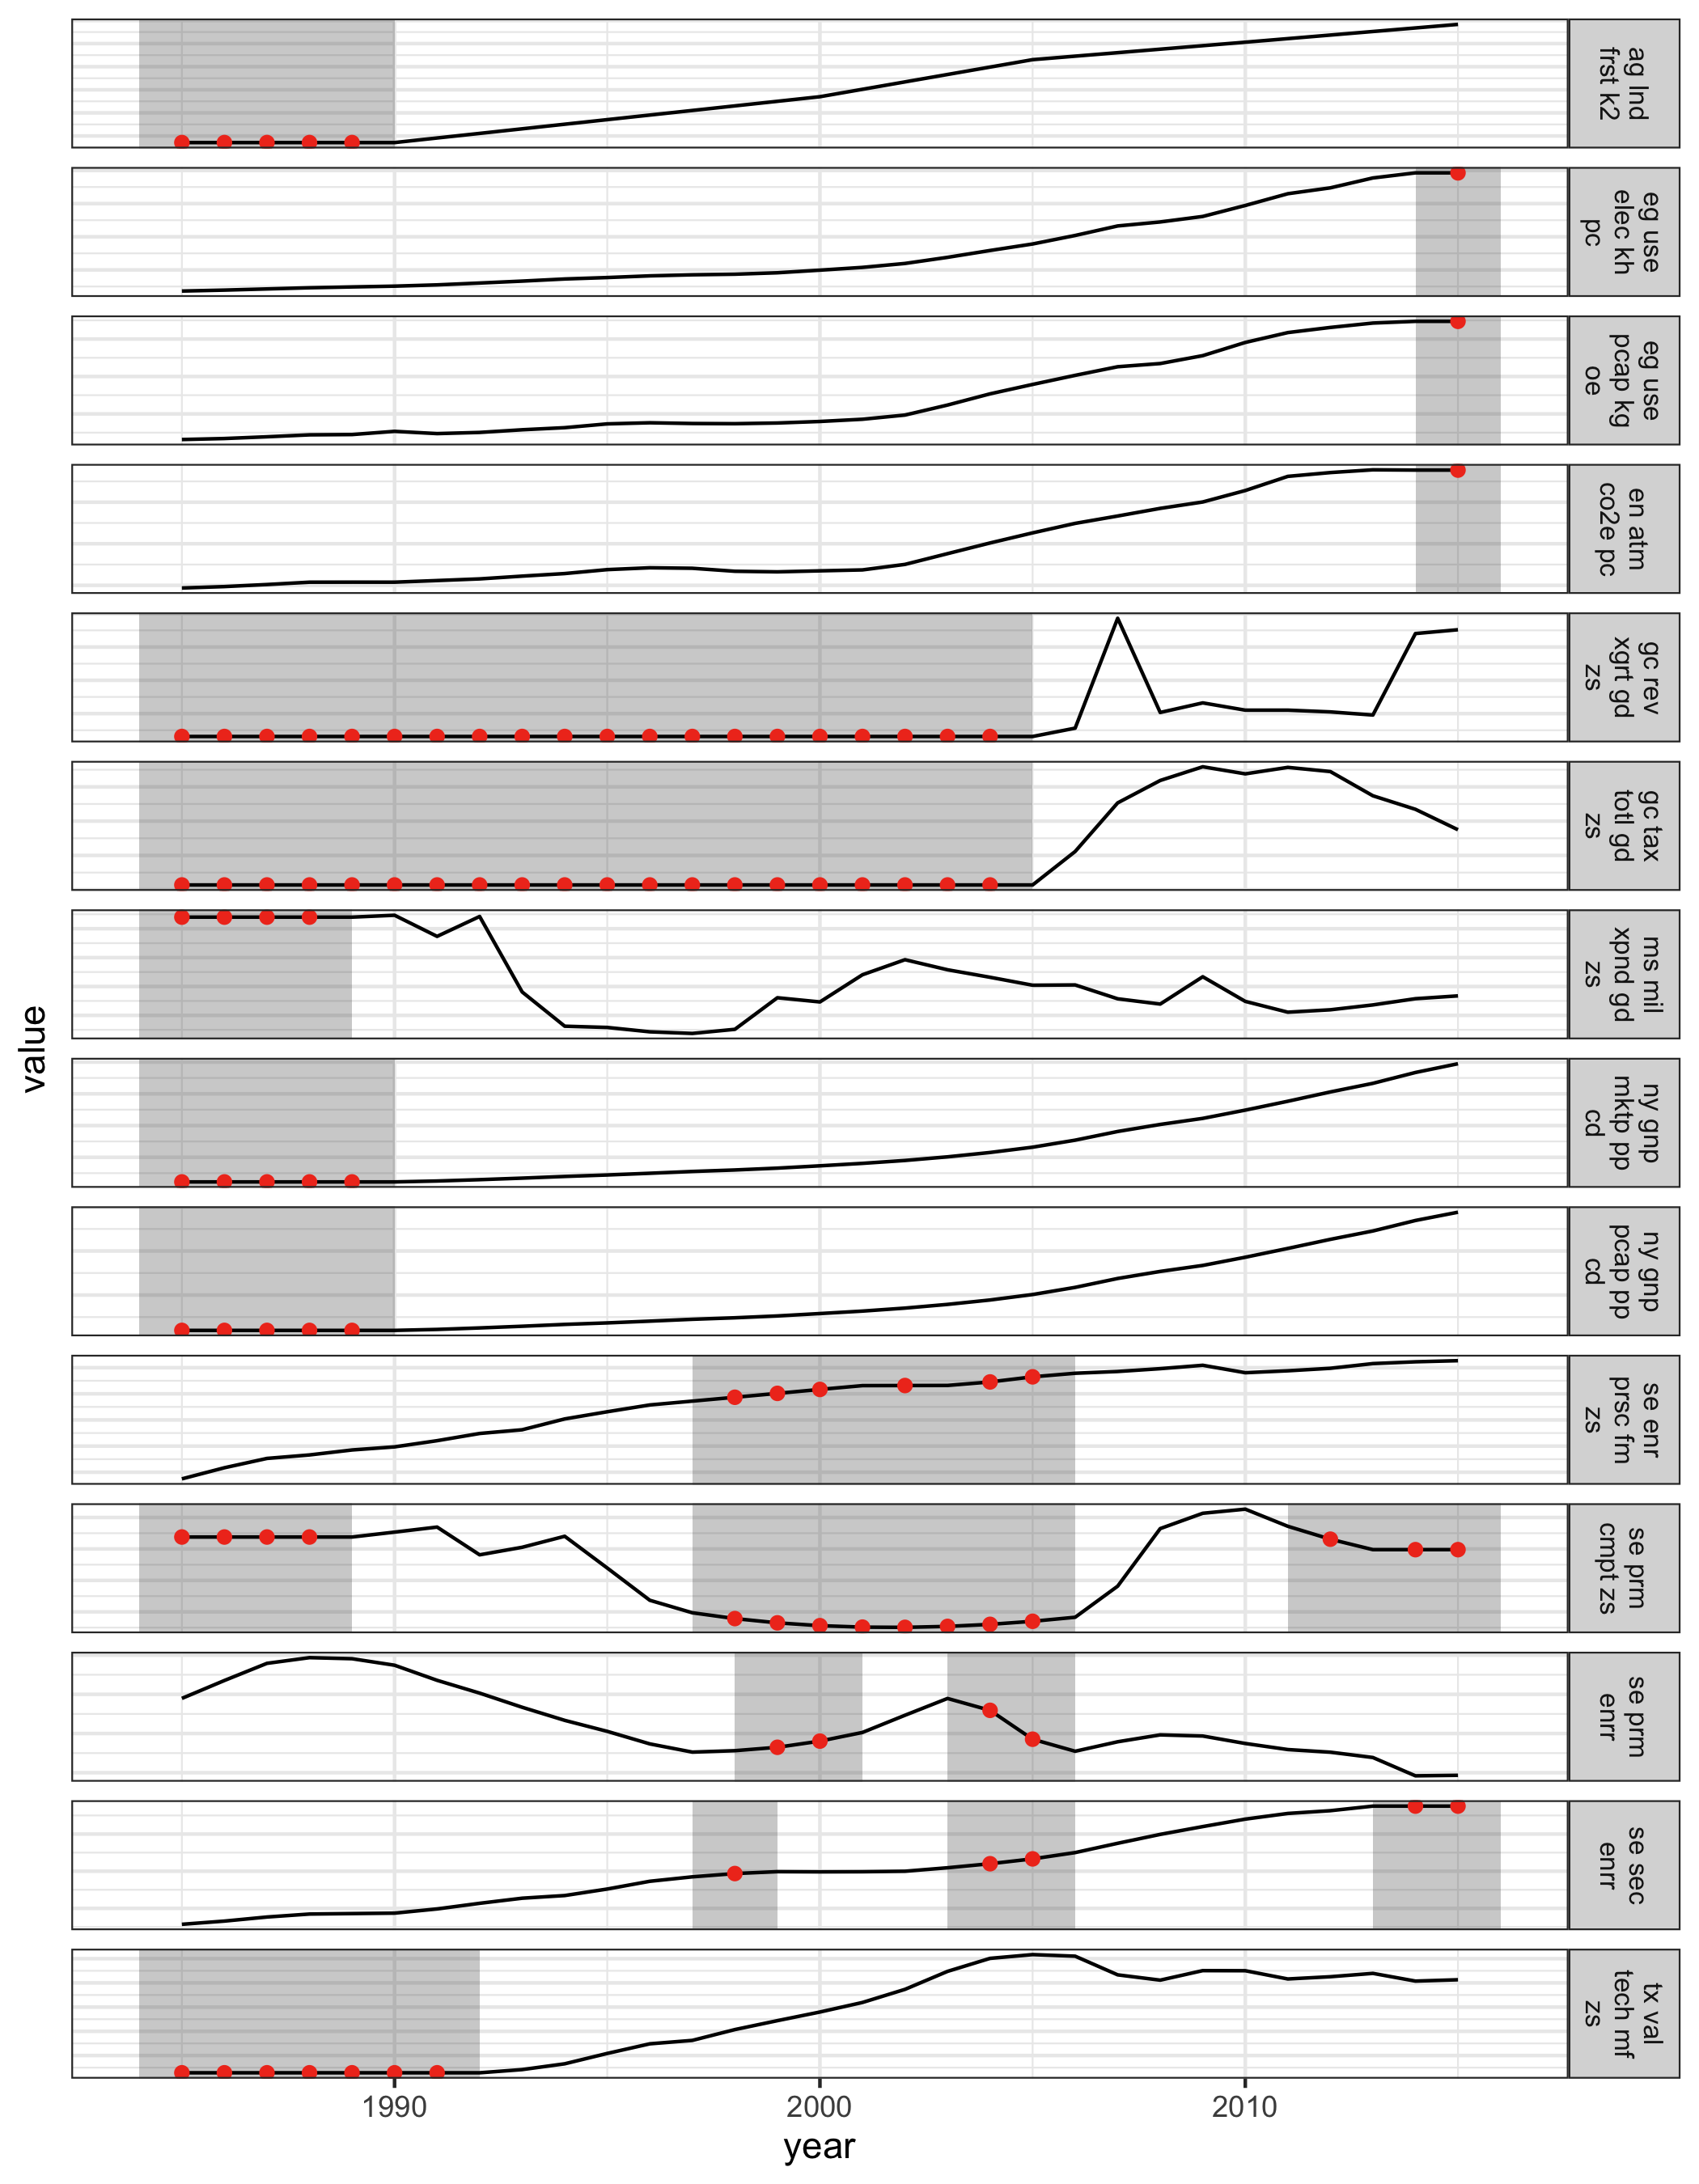 The jailbird plot, for the subset of 14 time series from China, overlaid with imputed values (red). The gaps are filled with the well-behaved imputations that are consistent with the complete data.